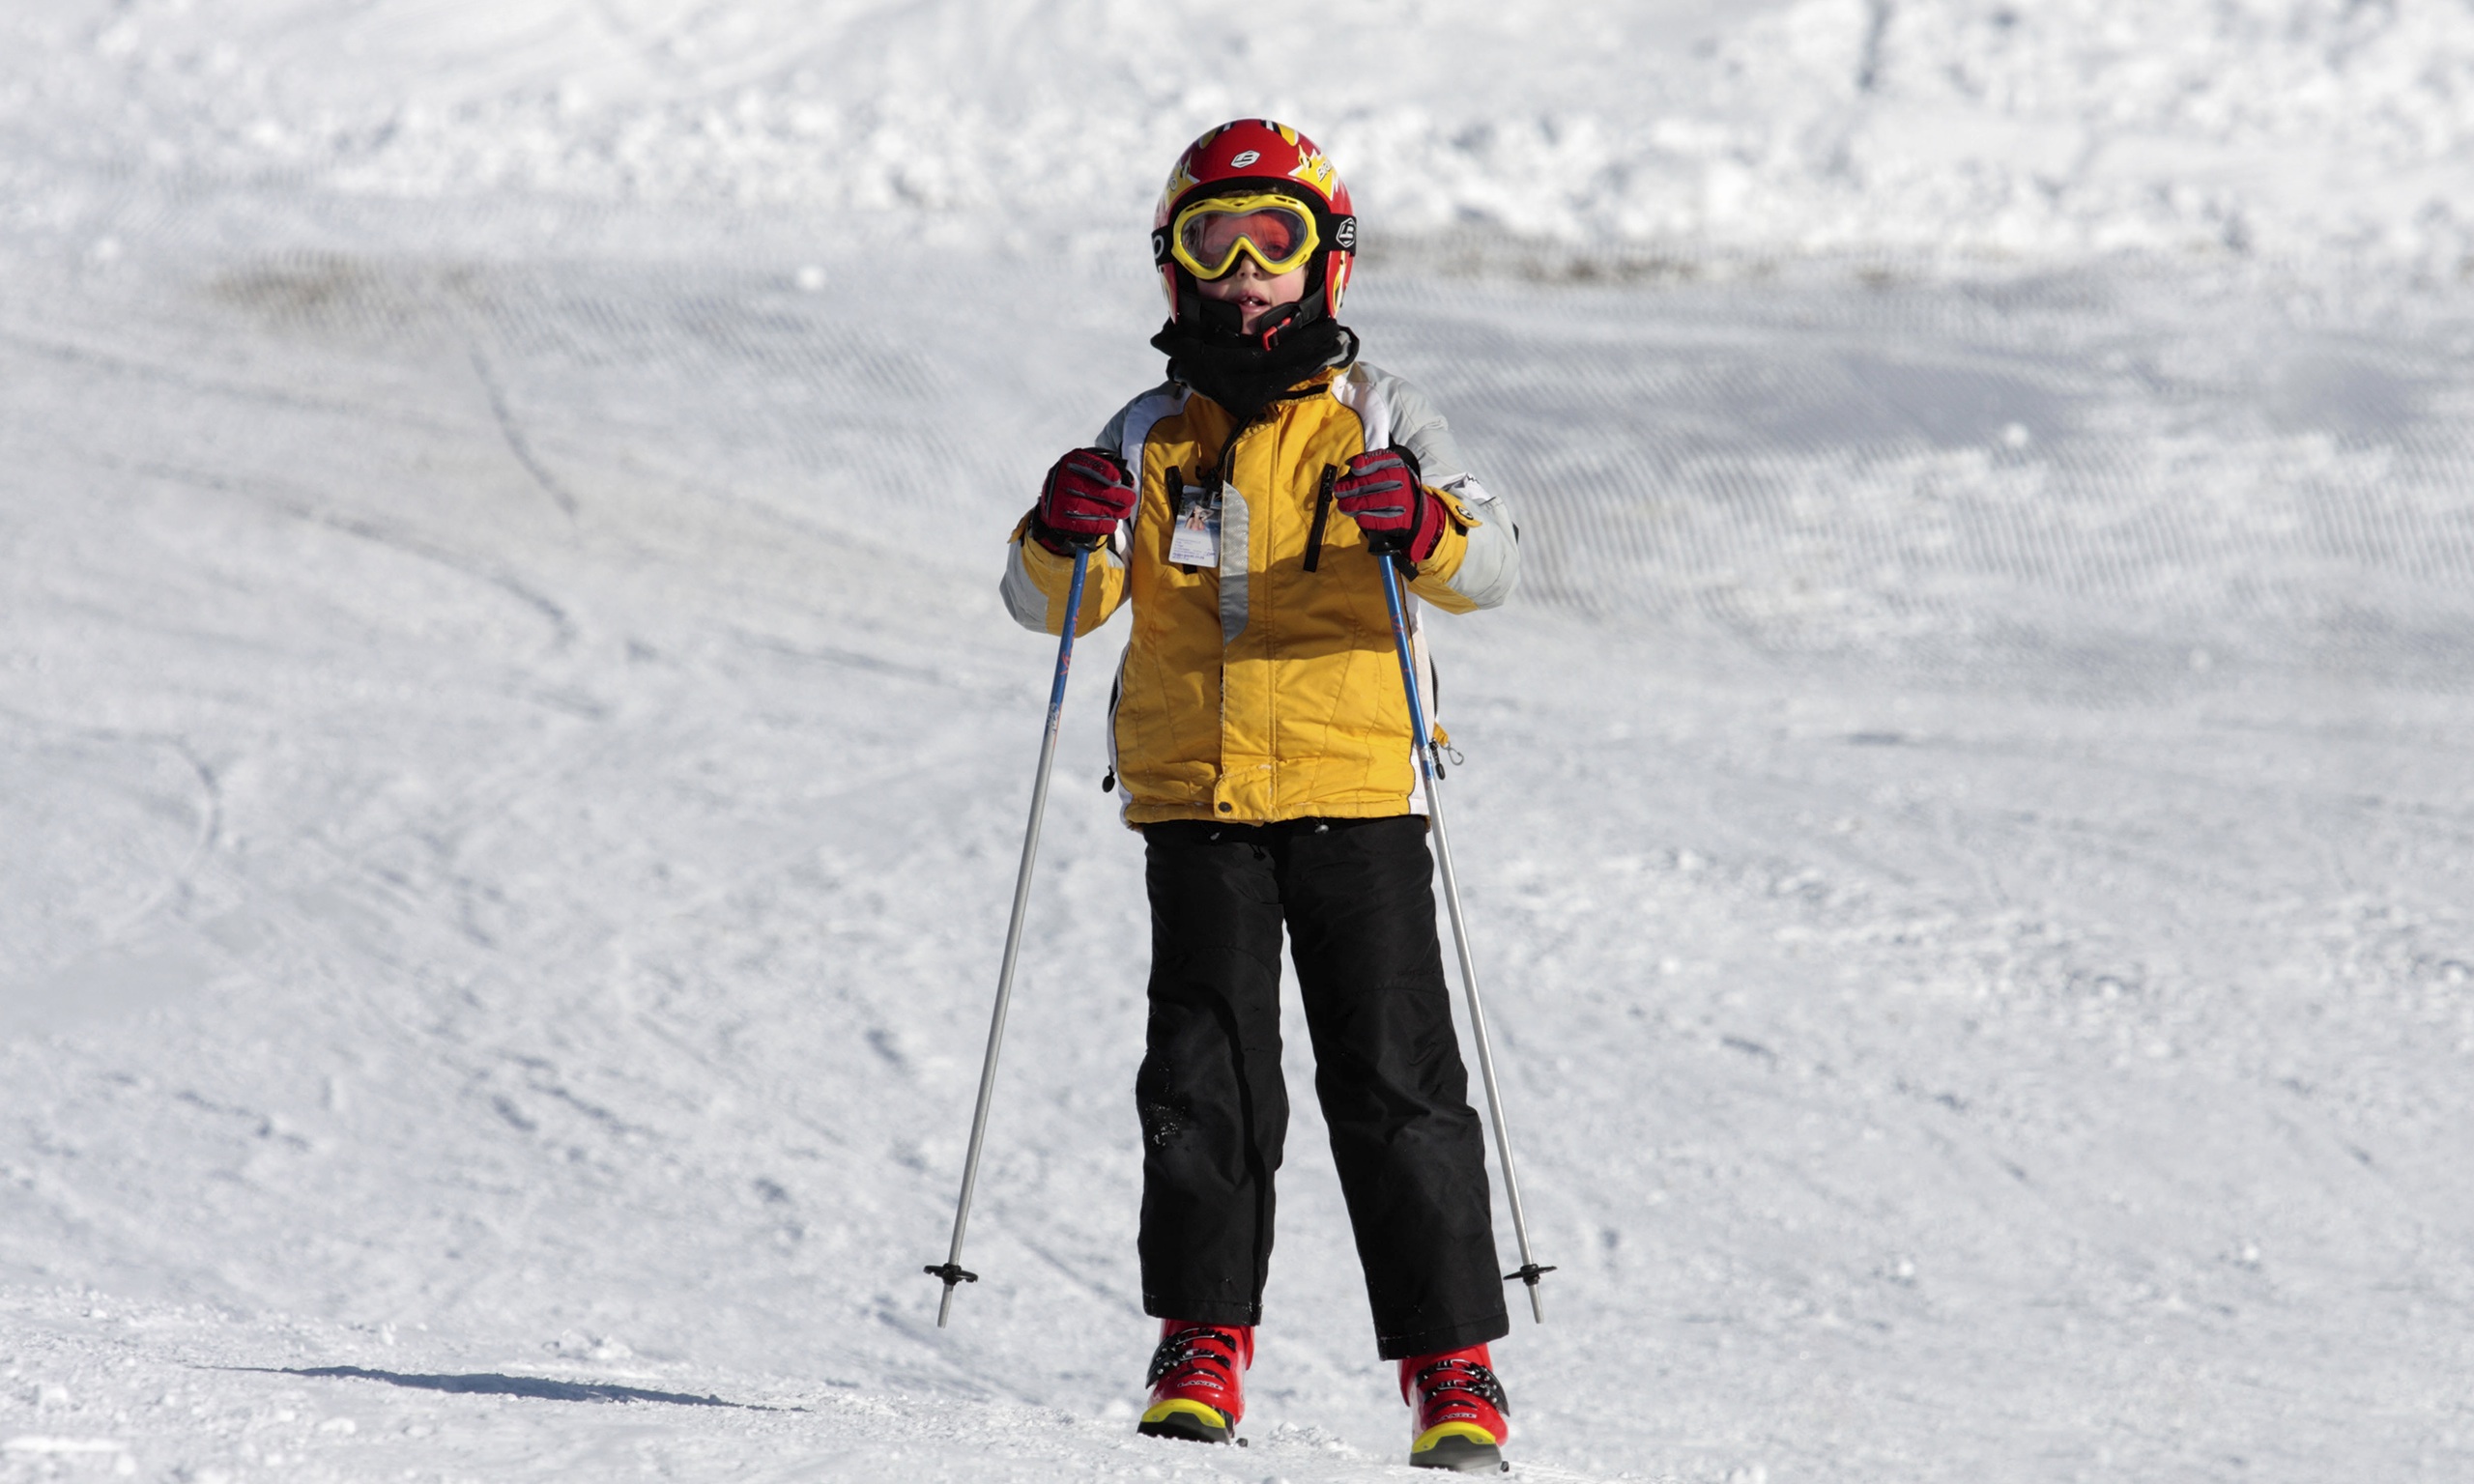 Should I wear a helmet on the ski slopes? | Life and style | The Guardian